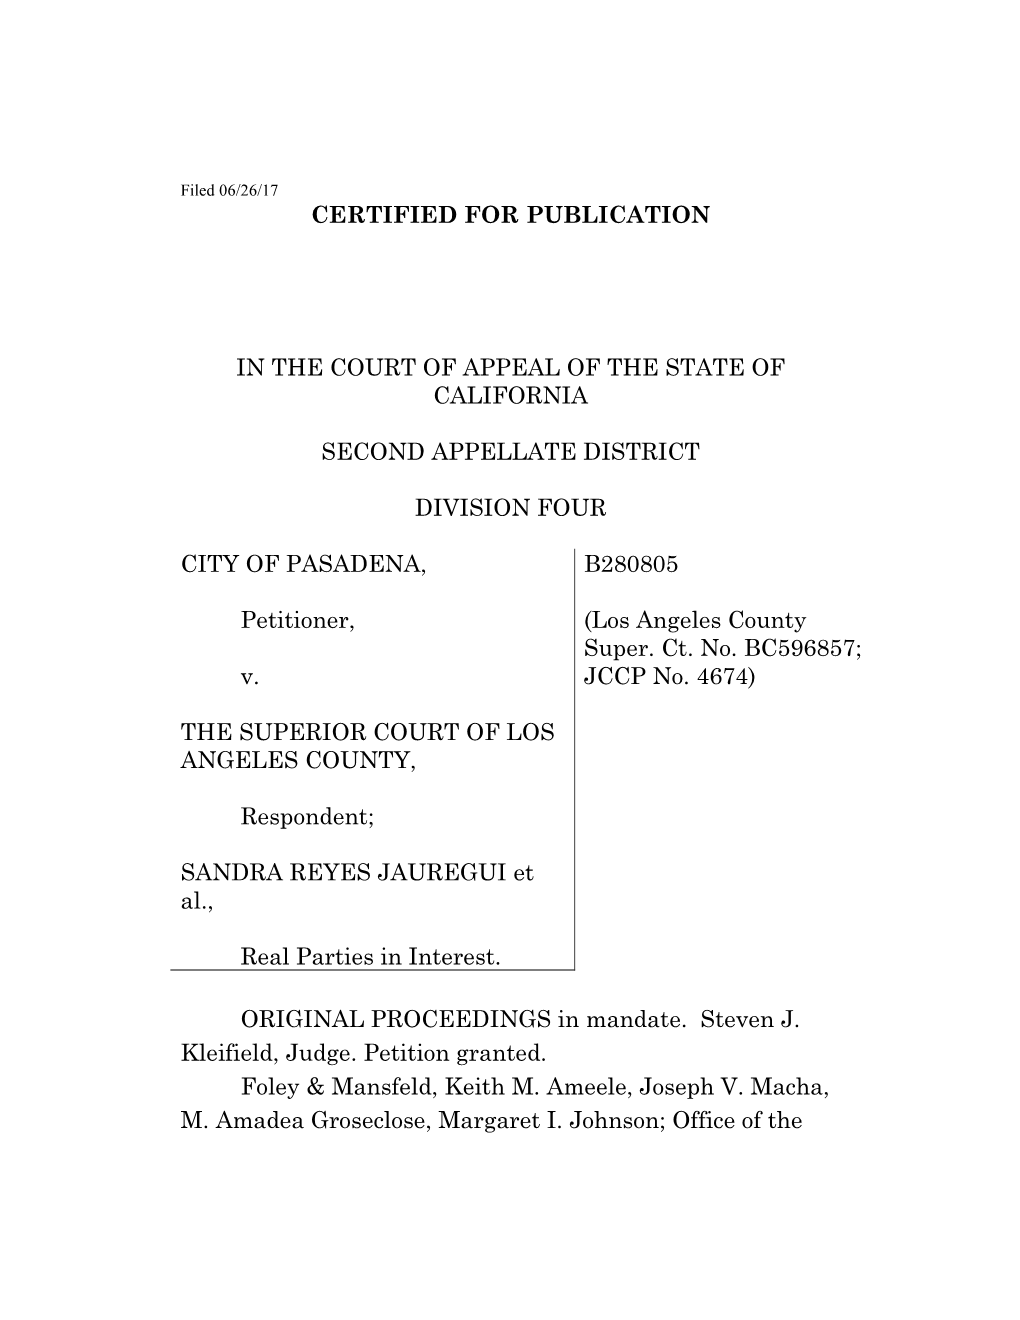 Certified for Publication in the Court of Appeal of the State of California Second Appellate District Division Four City of Pasa